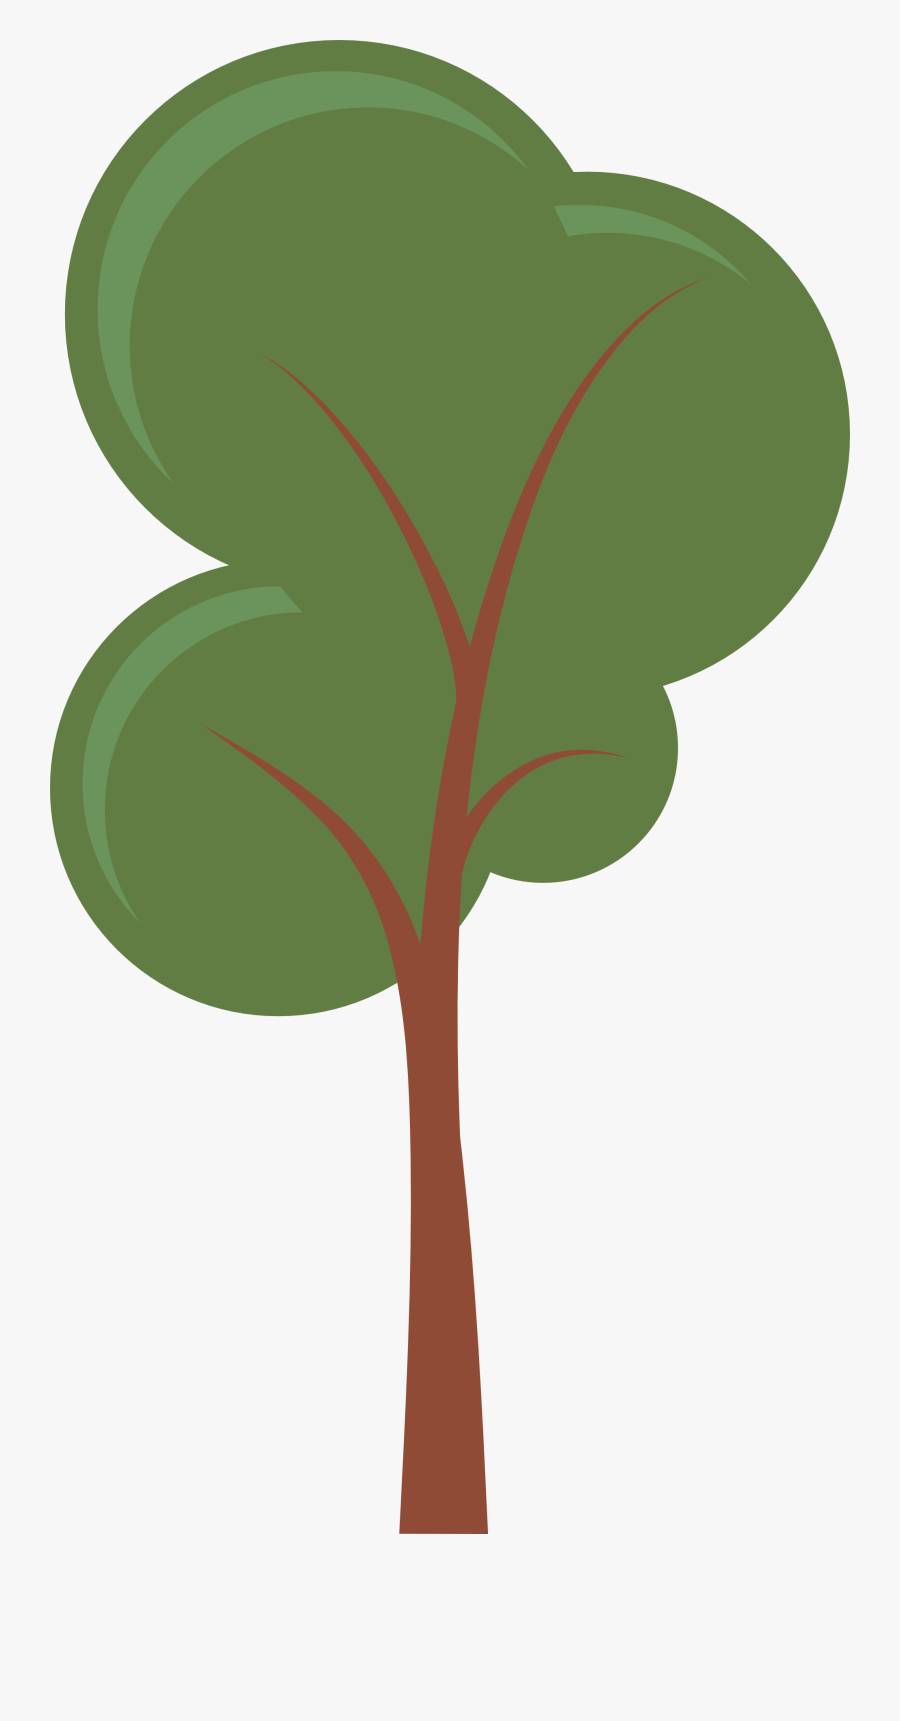 Tree Of Life Clipart At Getdrawings - Cartoon Tree Vector Png, Transparent Clipart